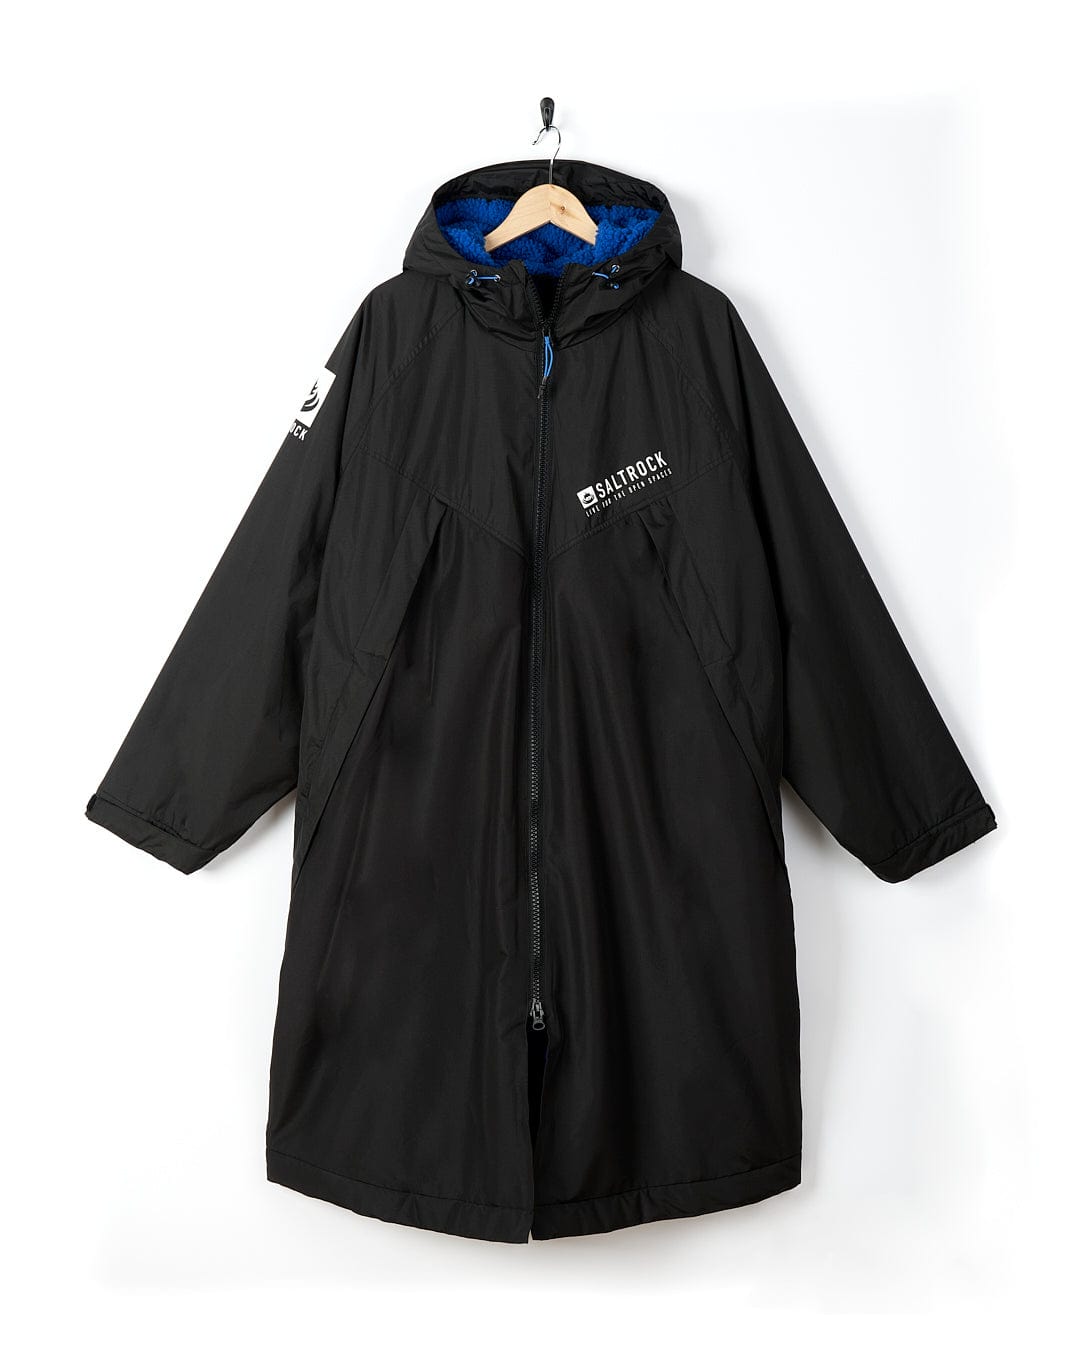 A Saltrock Four Seasons - Waterproof Changing Robe - Black/Blue, designed for high performance and crafted with waterproof materials, hangs elegantly on a hanger.